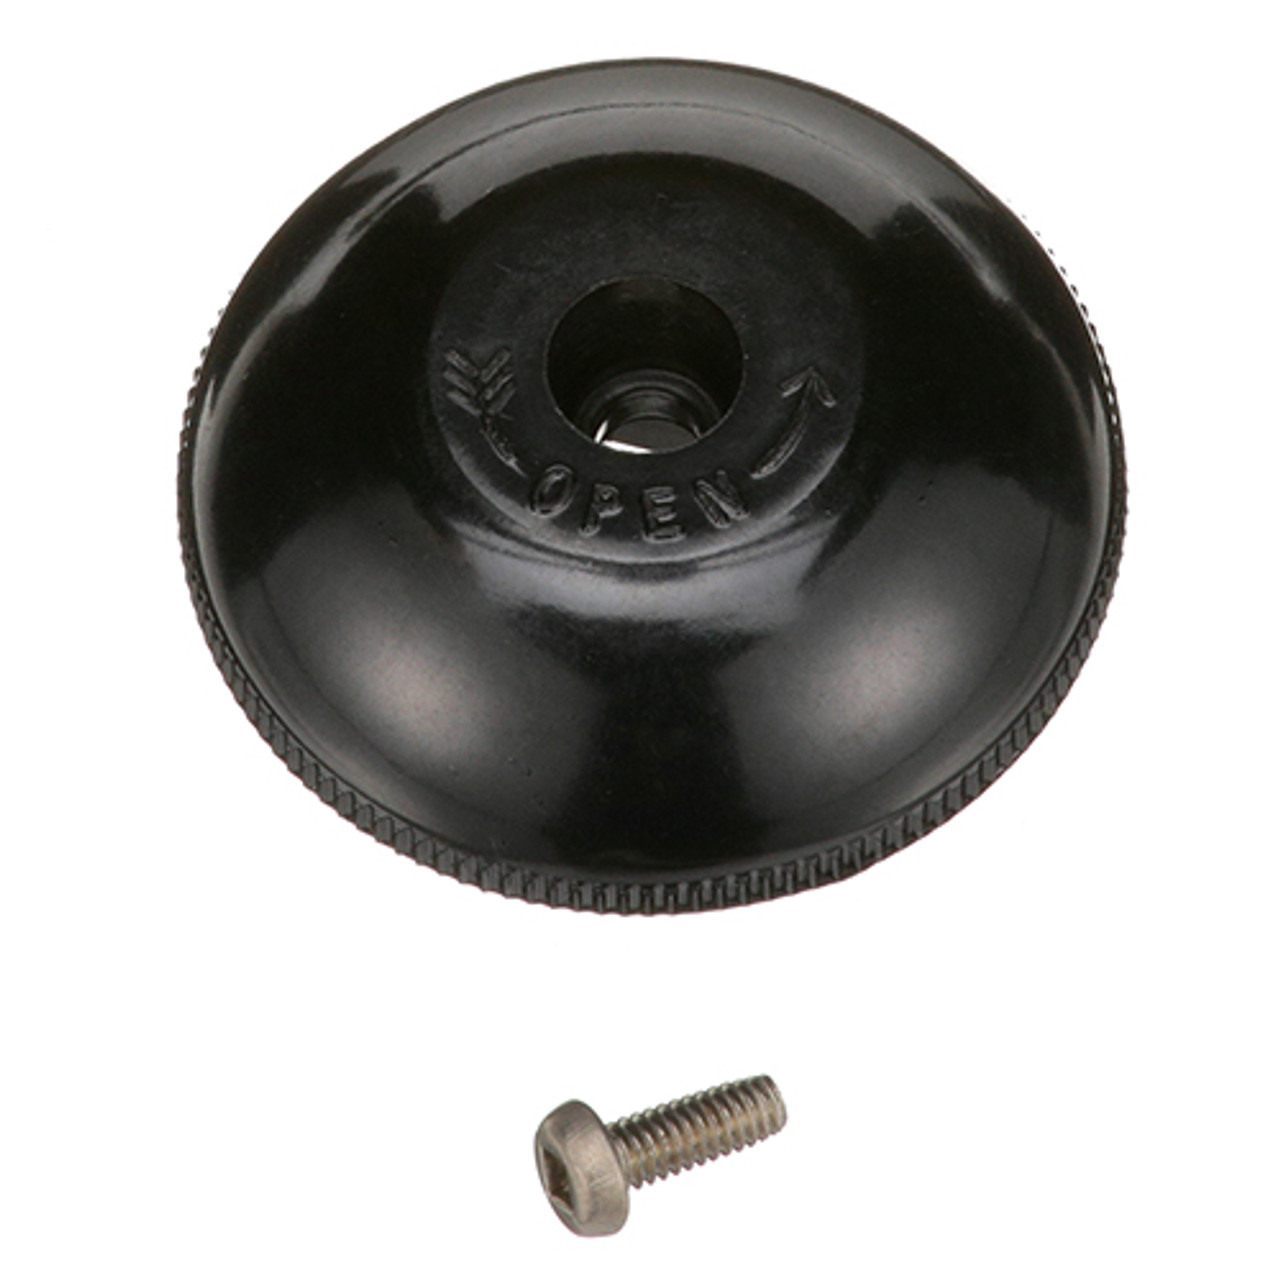 Knob For Dmt-40 - Replacement Part For Market Forge 97-5361